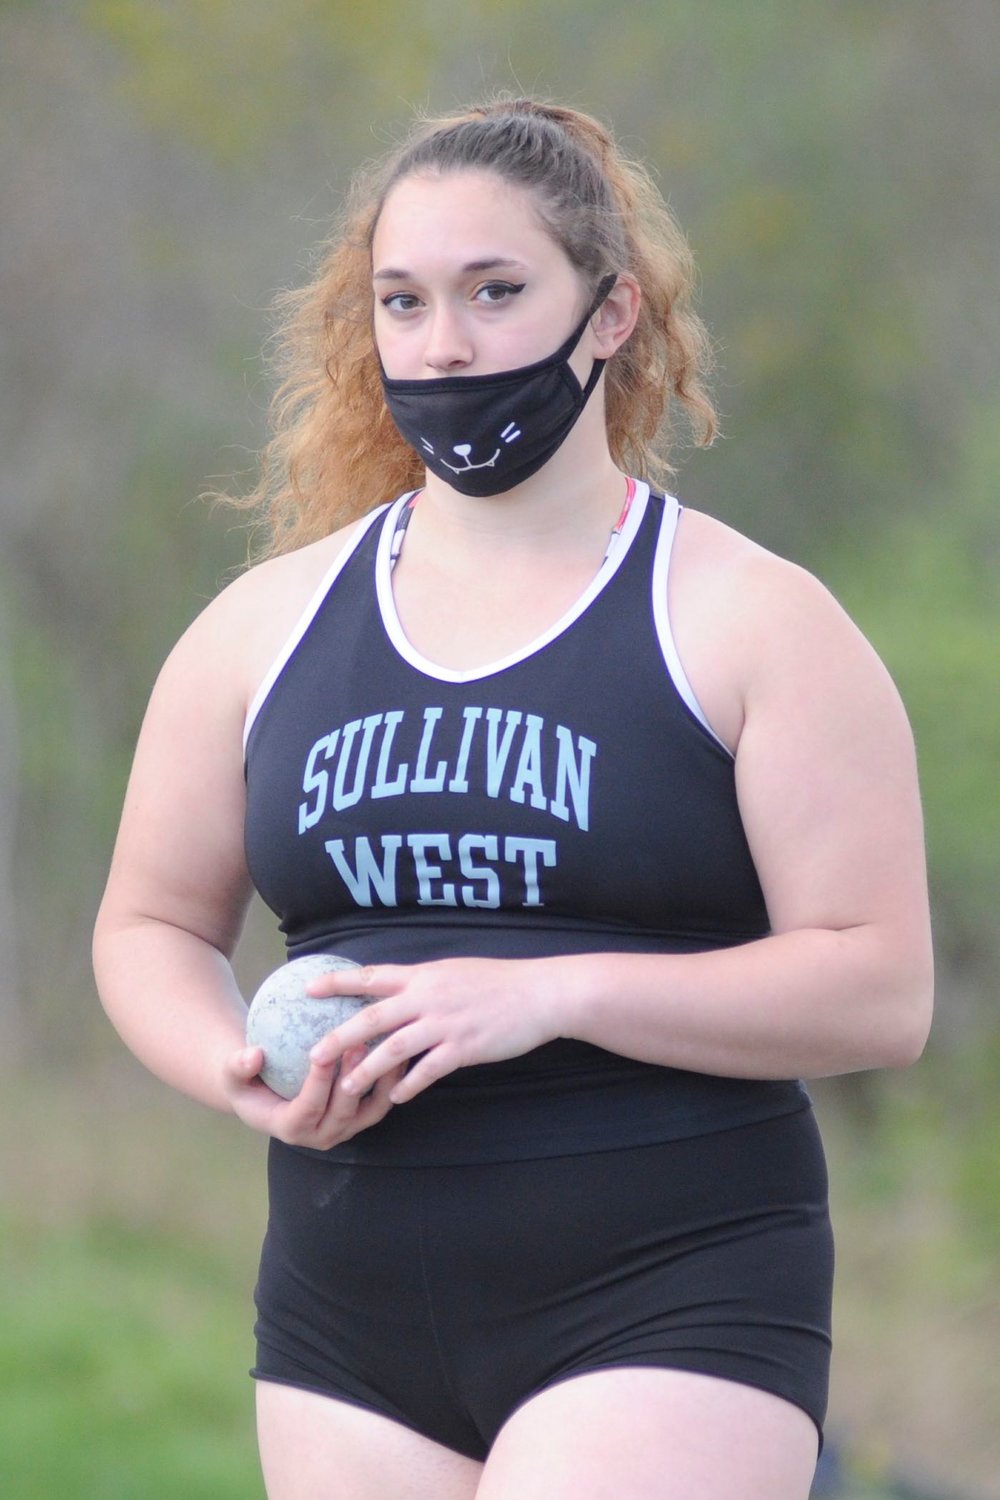 Kathryn Widmann was named the 2021 Most Valuable Player in track and field. She broke several personal and school records in shot and discus, along with harvesting Section IX gold.